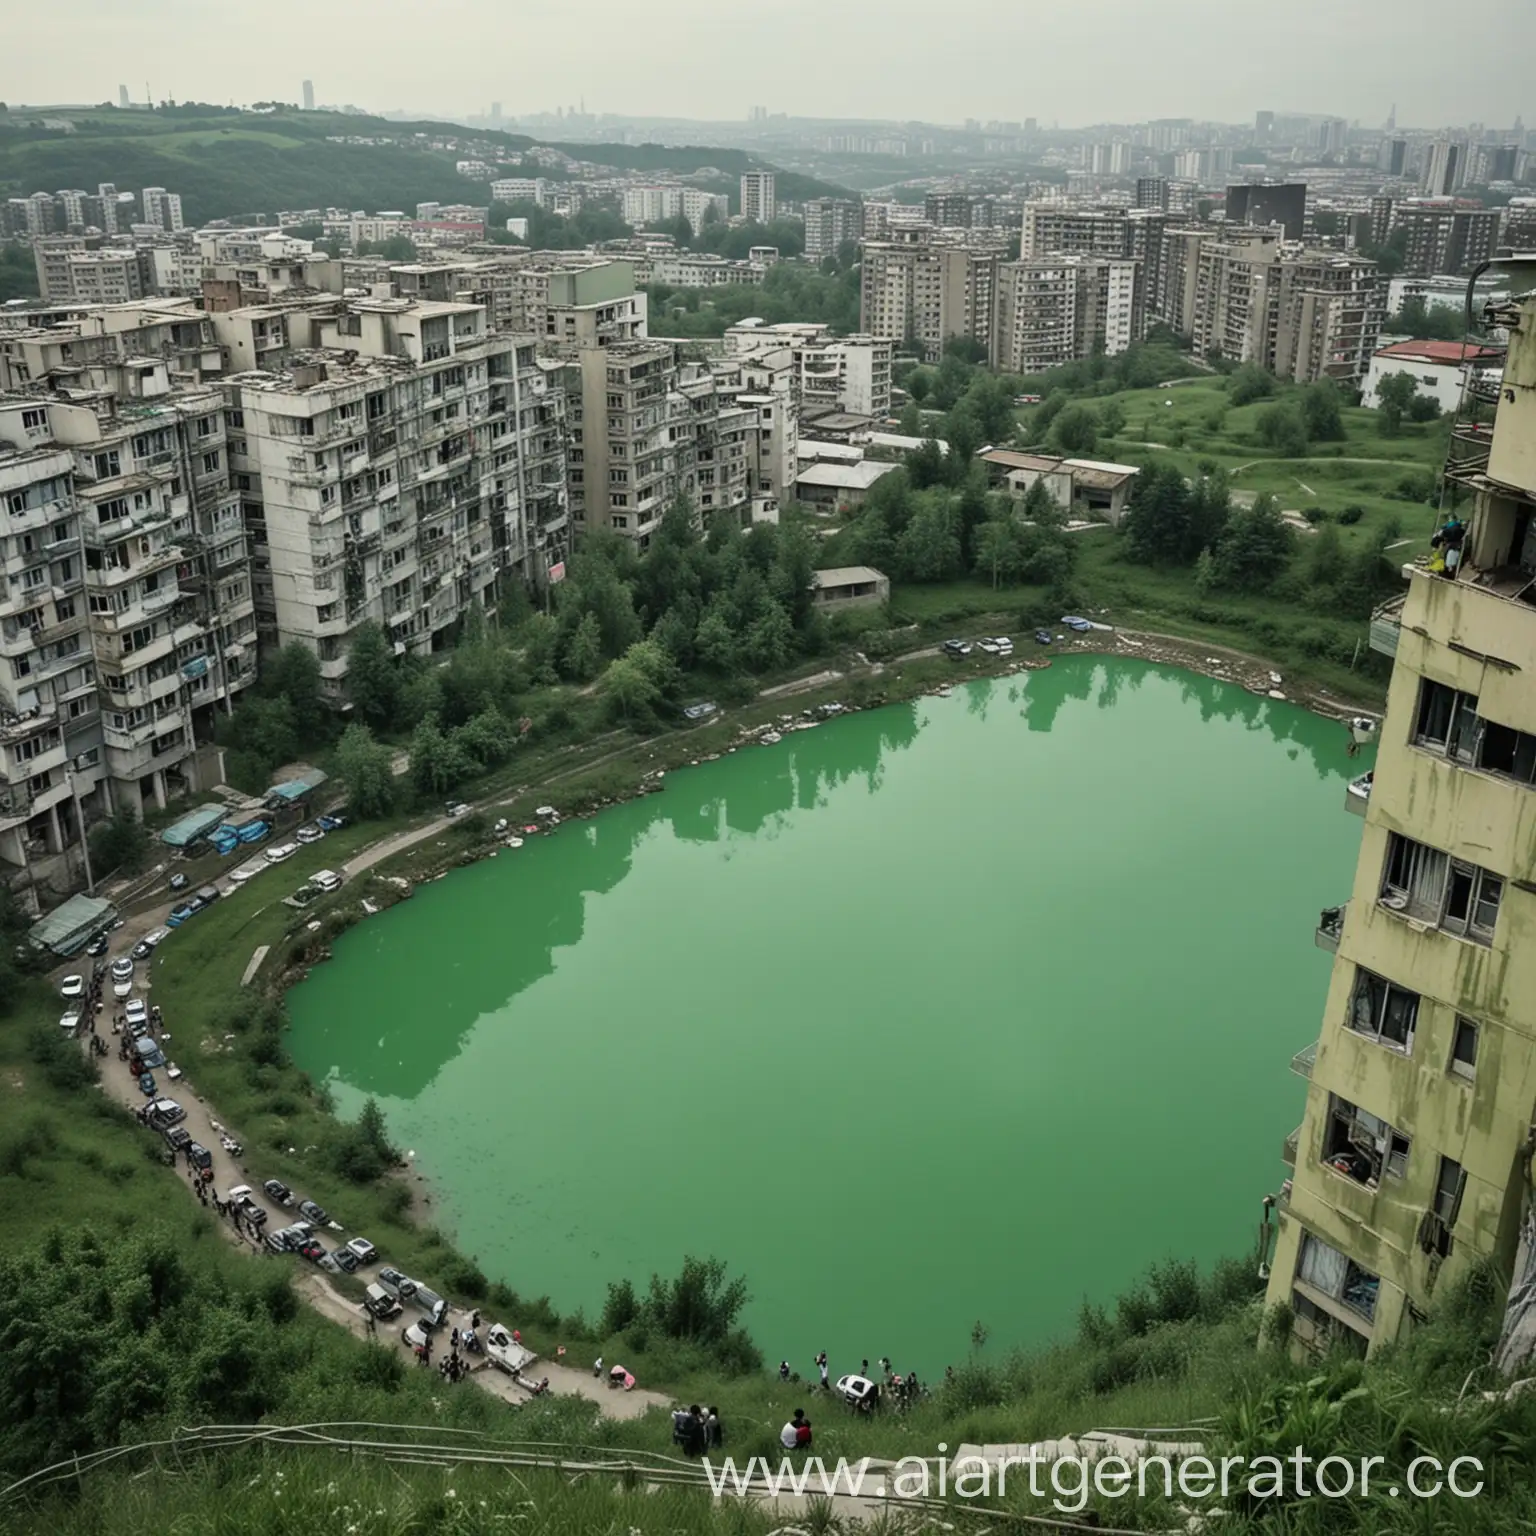 Urban-Pollution-Residents-Suffering-Amidst-Green-Sky-and-Water